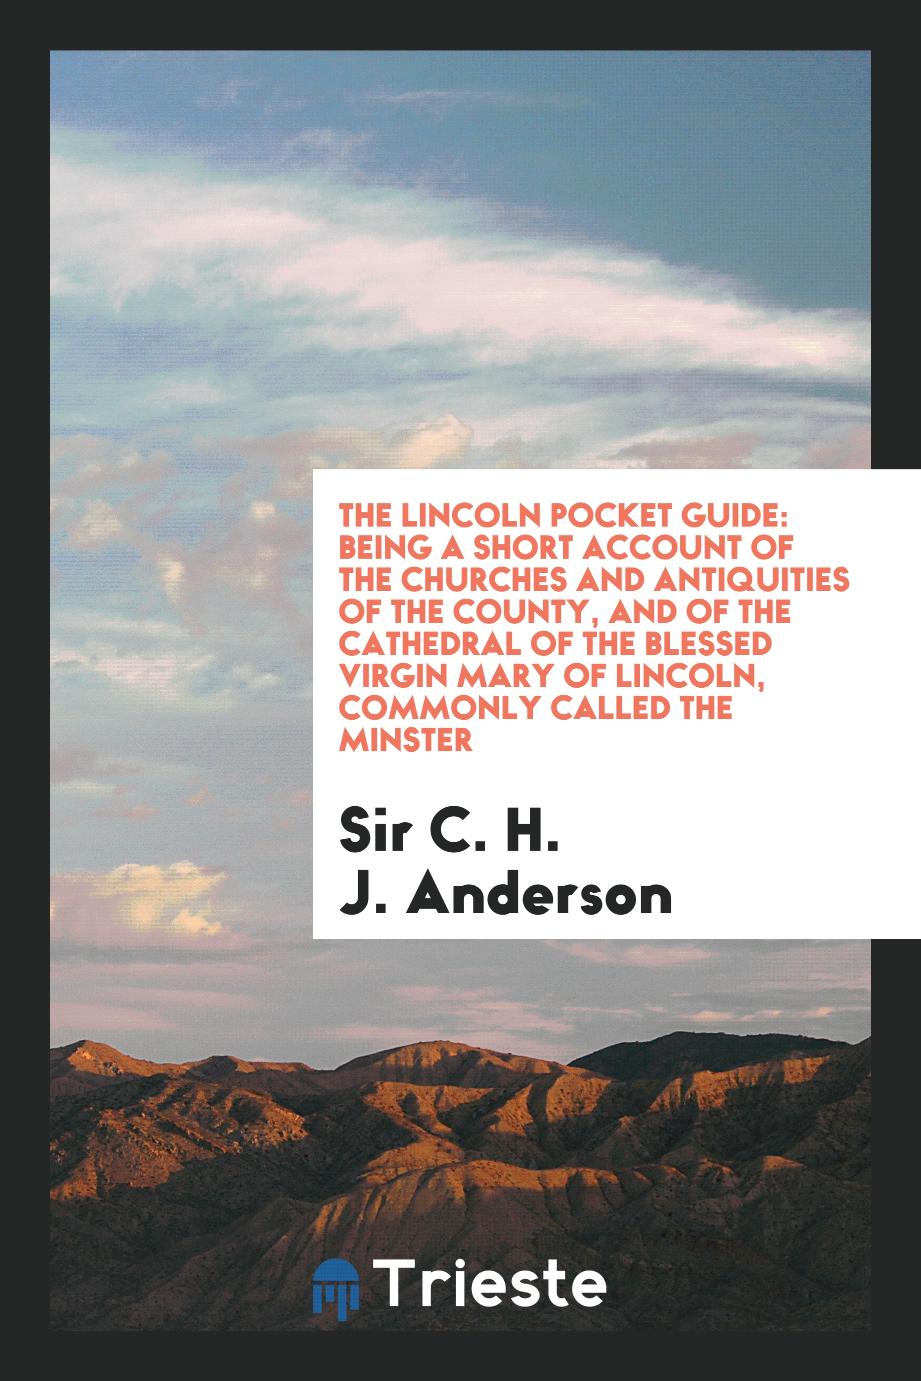 The Lincoln Pocket Guide: Being a Short Account of the Churches and Antiquities of the County, and of the Cathedral of the Blessed Virgin Mary of Lincoln, Commonly Called the Minster